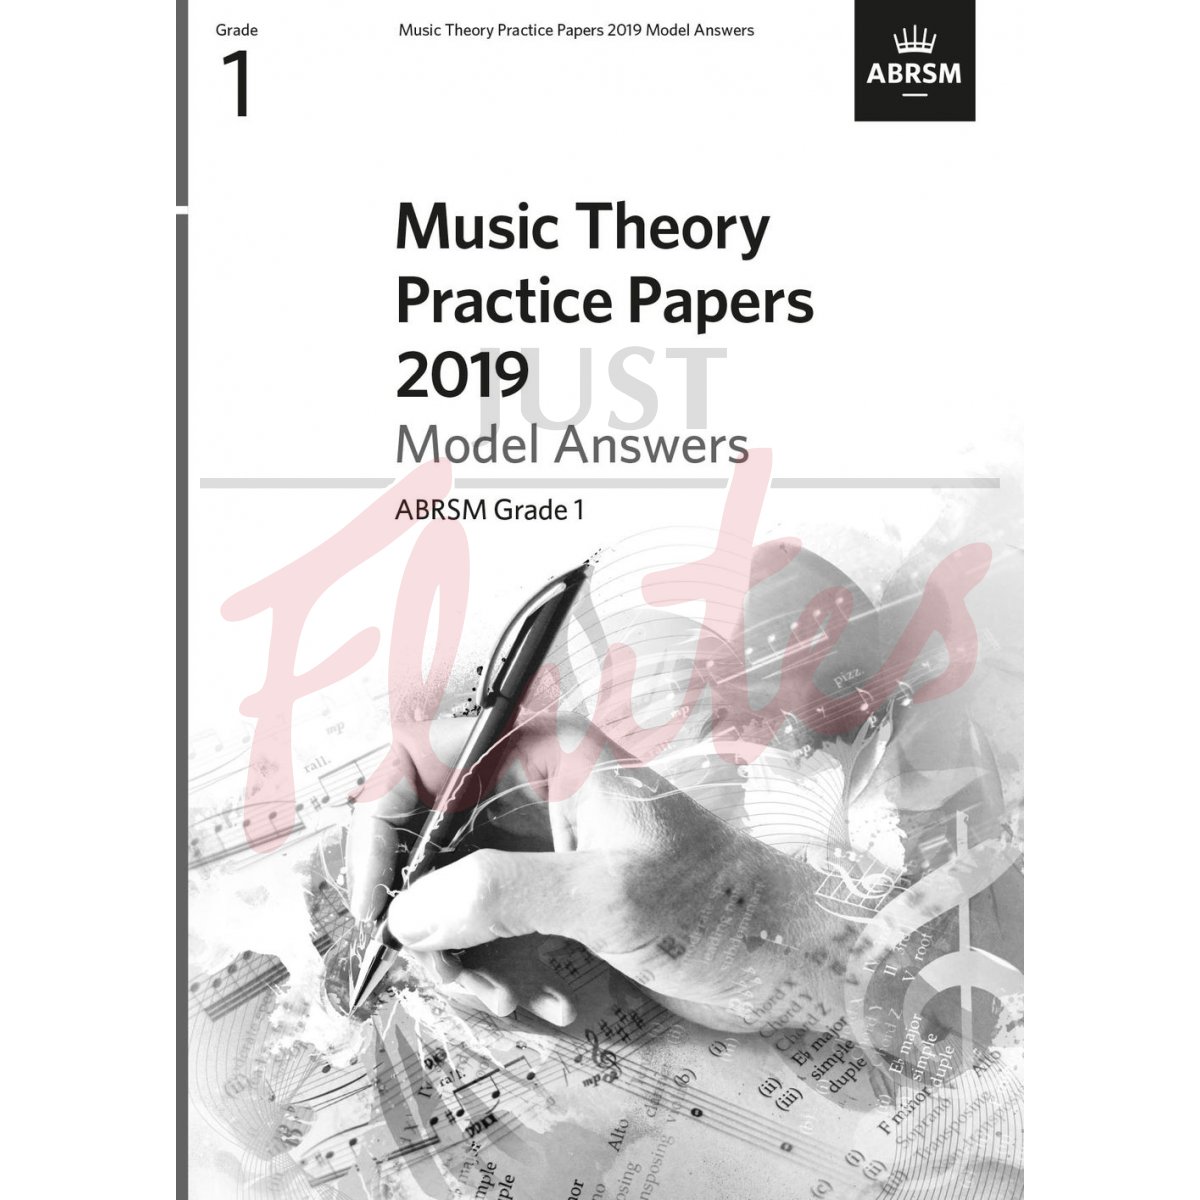 Music Theory Practice Papers 2019 Grade 1 - Model Answers